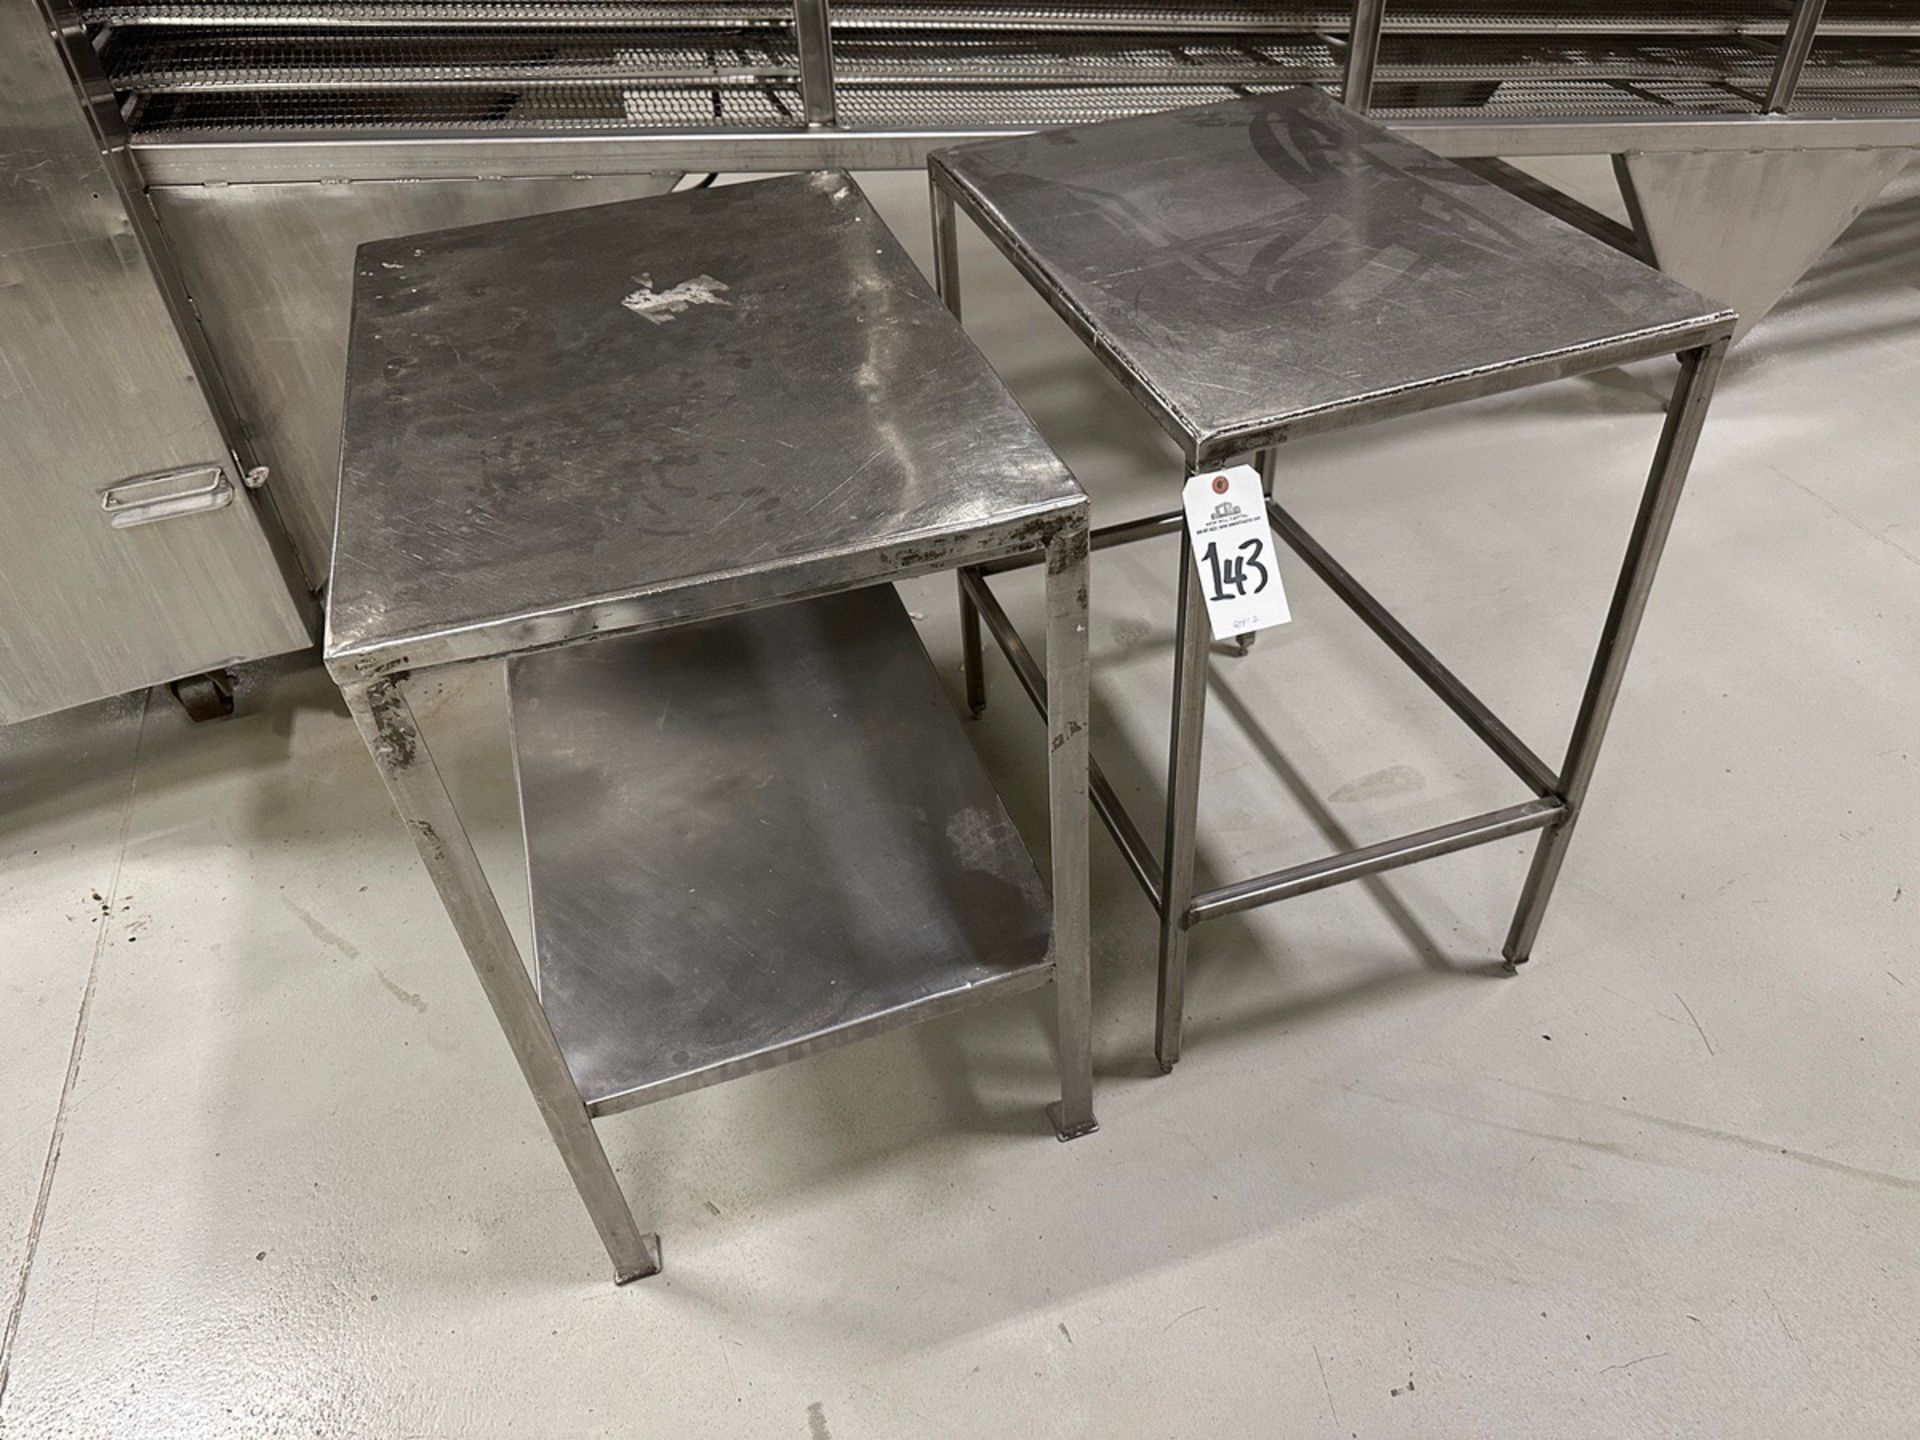 Lot of (2) Stainless Steel Tables - (1) 22" x 32" and (1) 20" x 30"